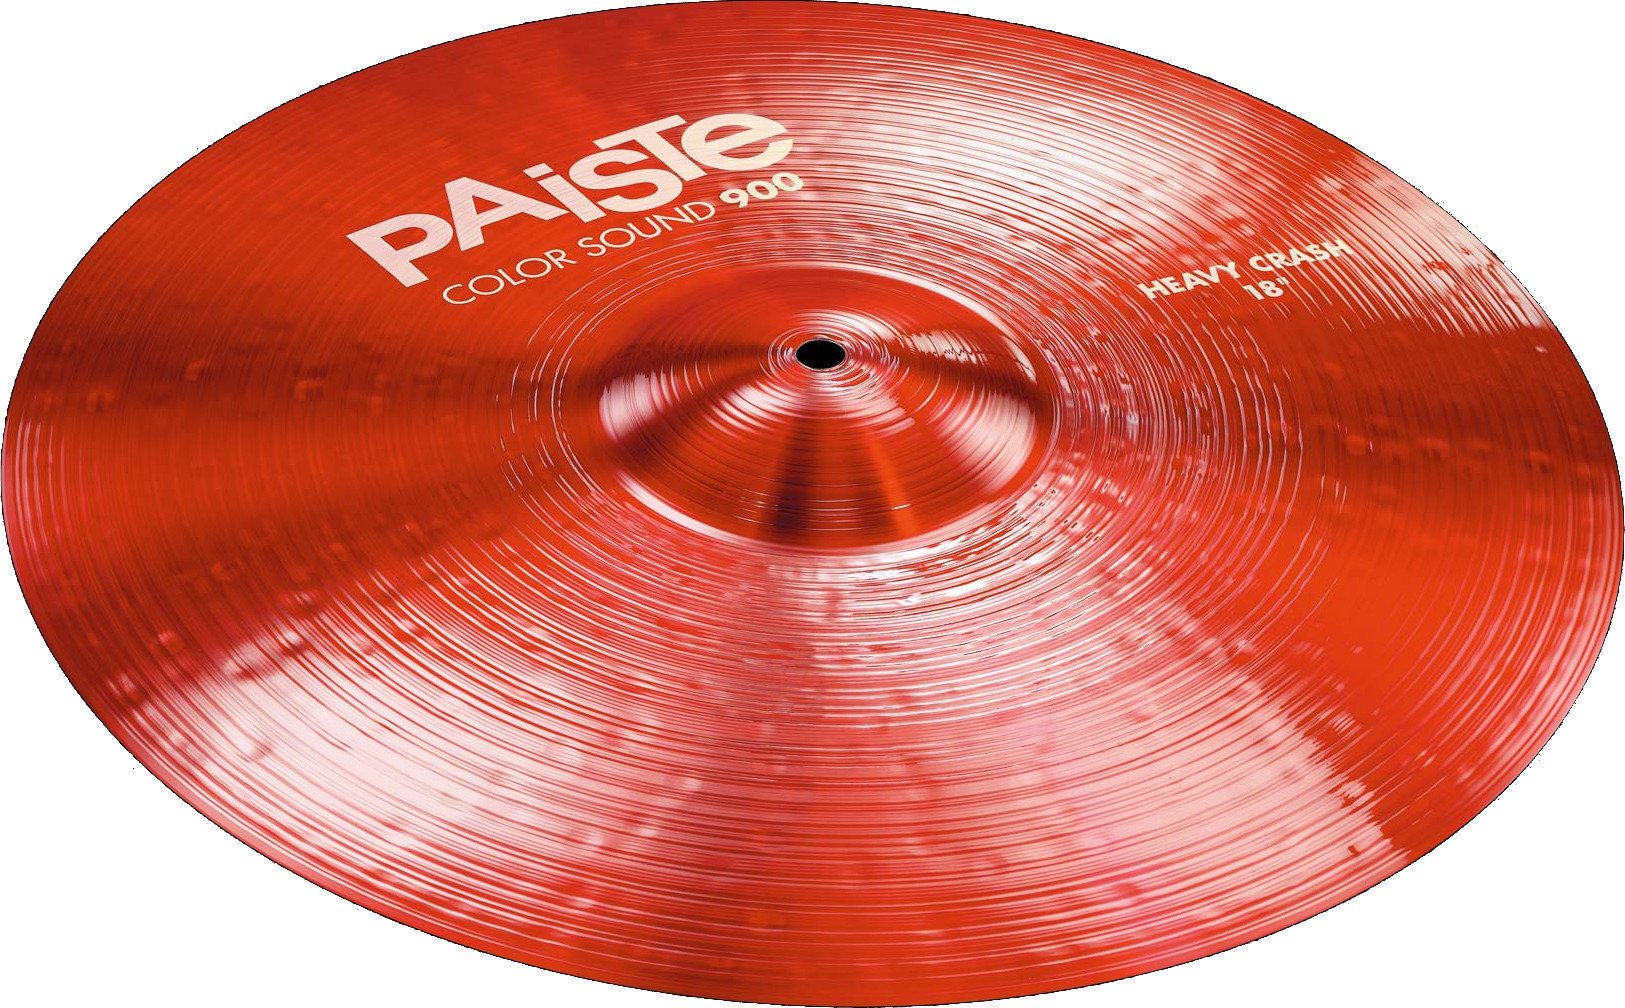 Crash Cymbal Paiste Color Sound 900  Heavy Crash Cymbal 19" Red